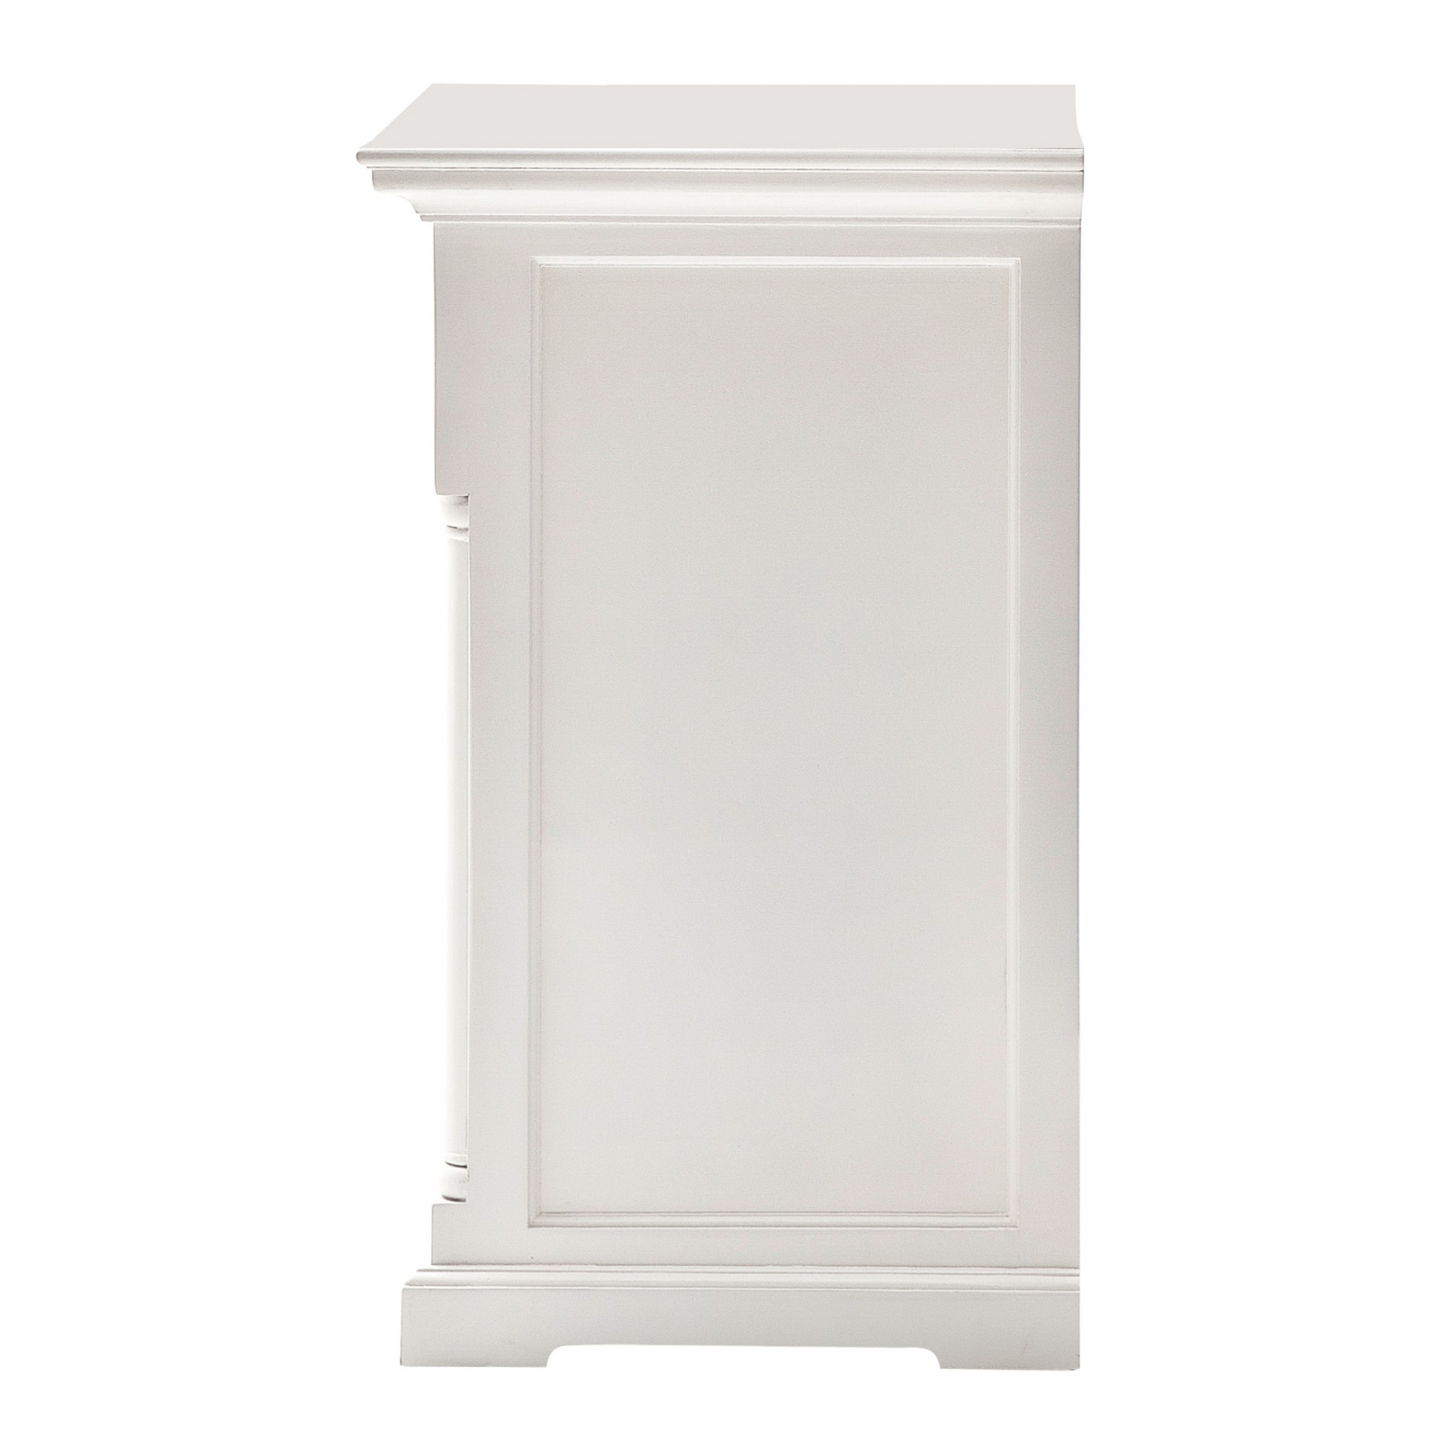 Classic White Hutch Cabinet - White - Higher Gallery